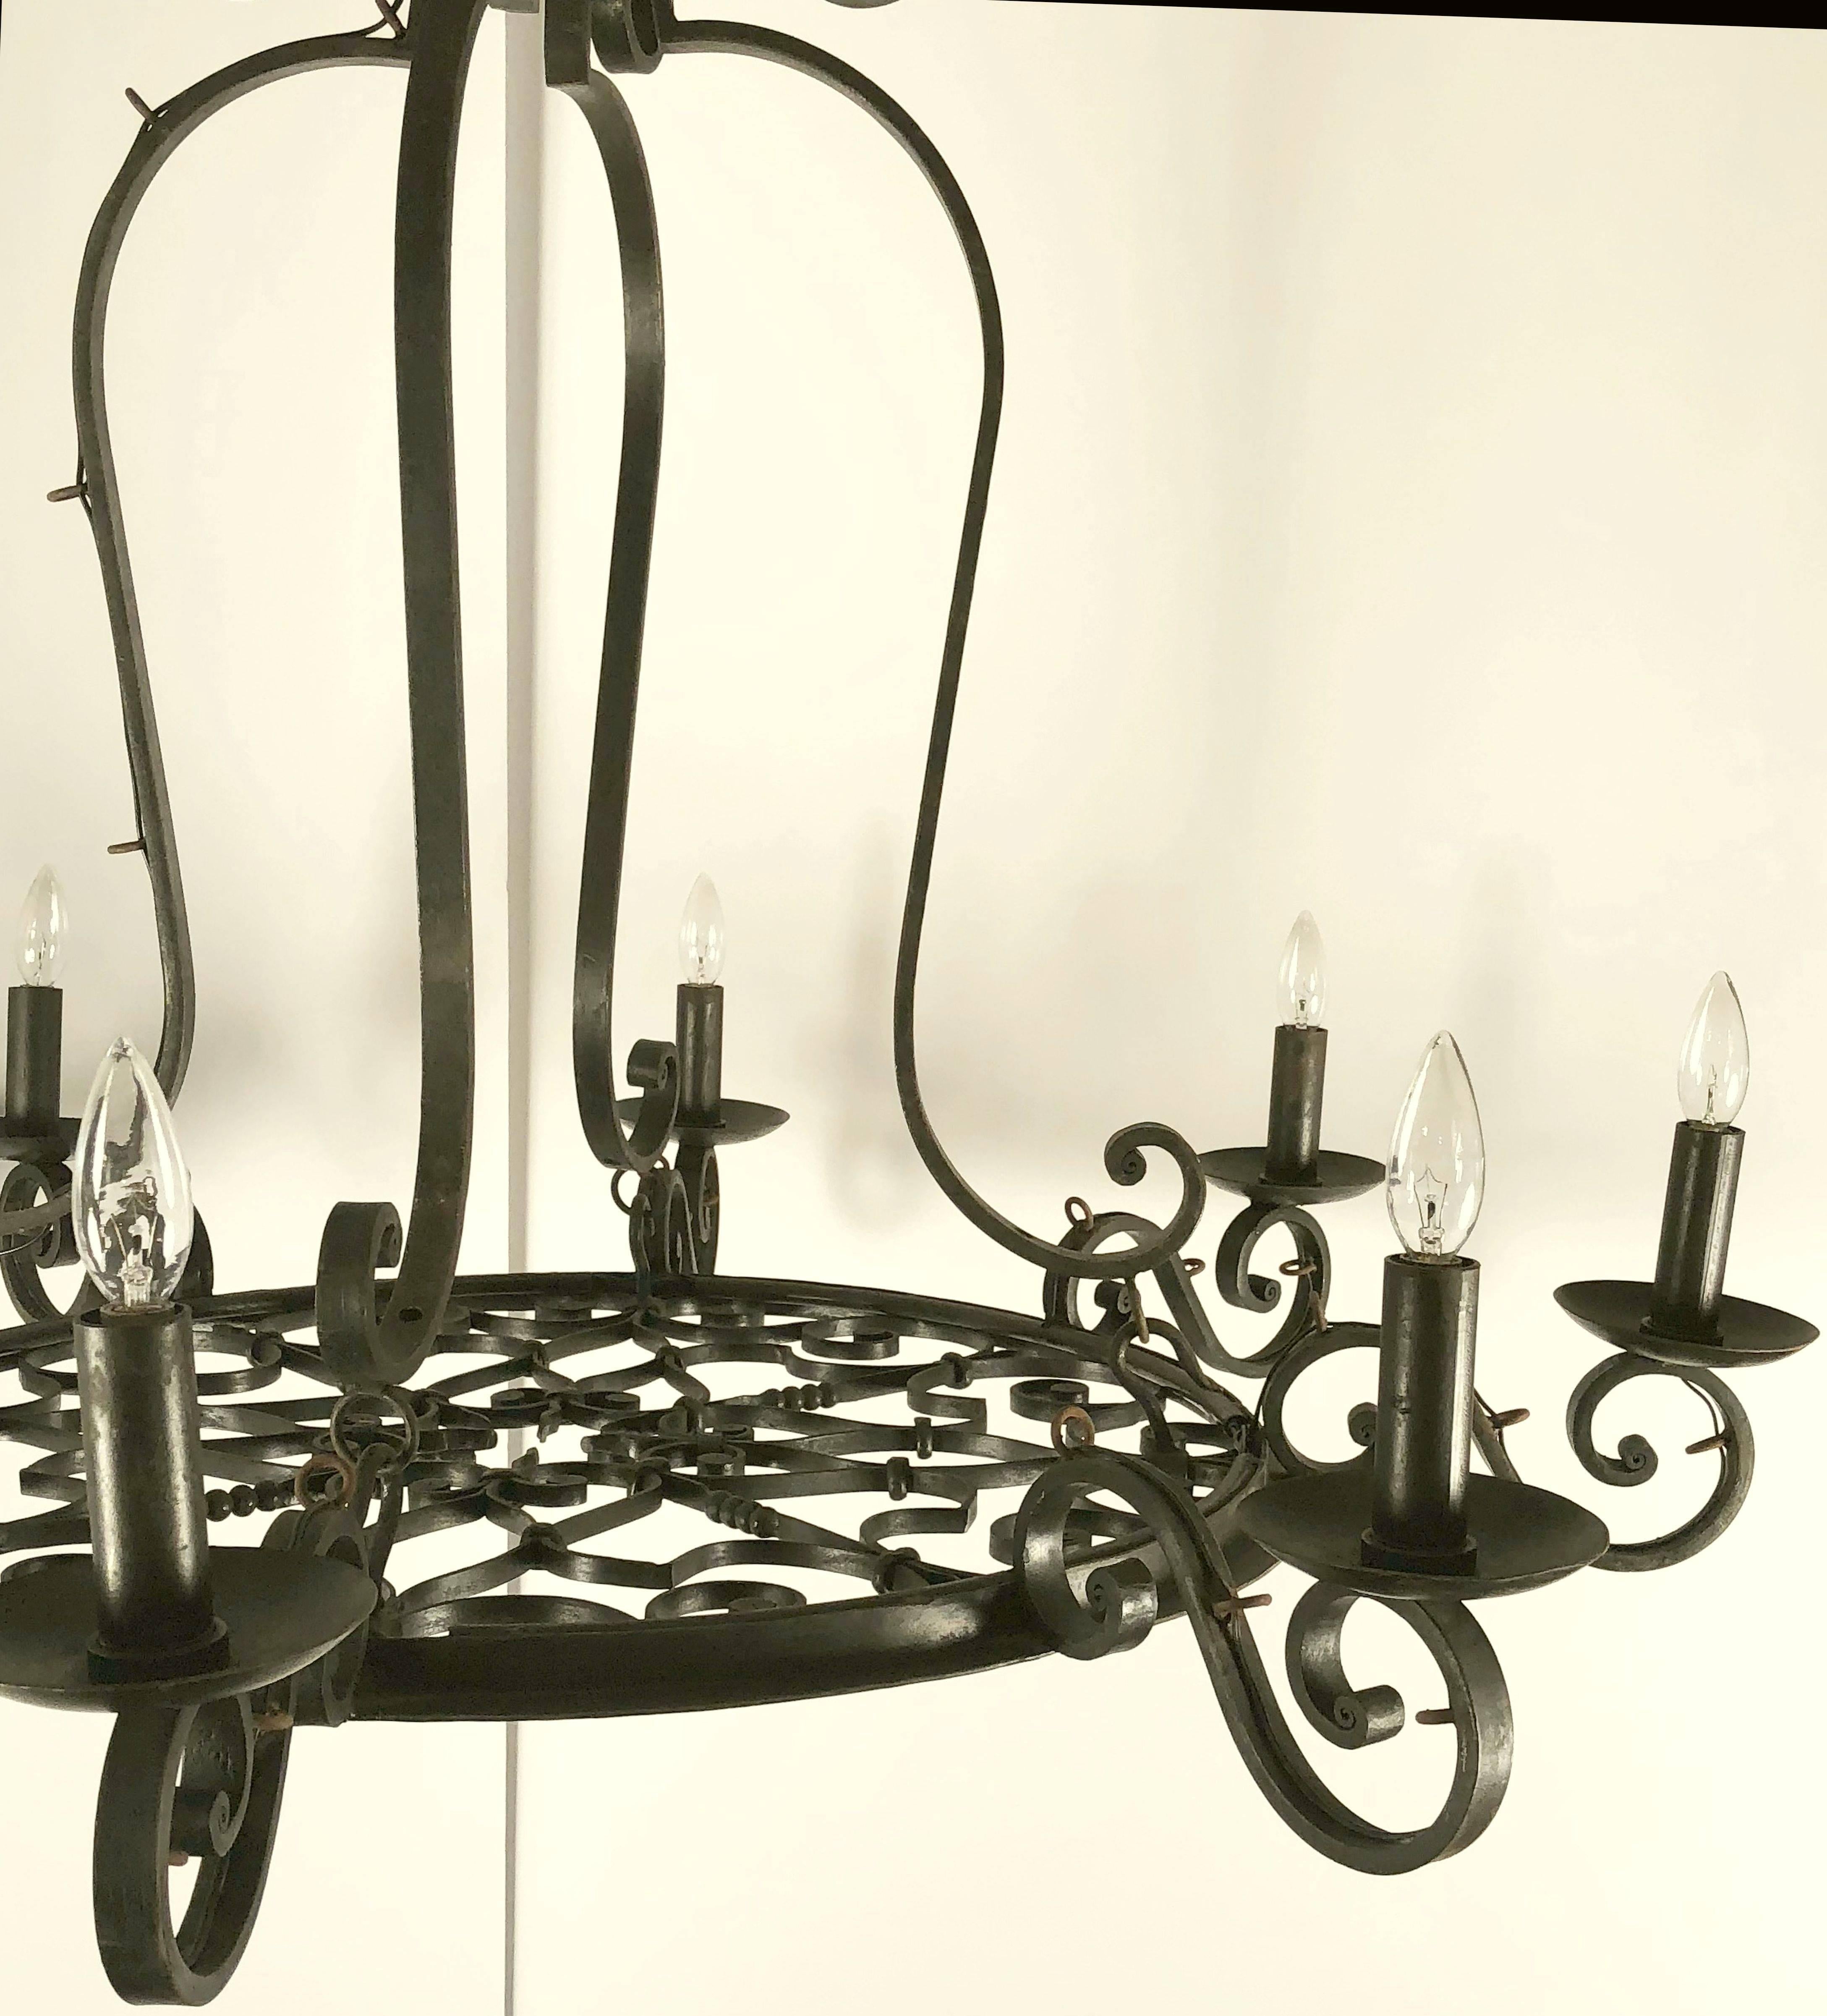 20th Century Large Eight-Light Hanging Fixture of Wrought Iron (47 1/2